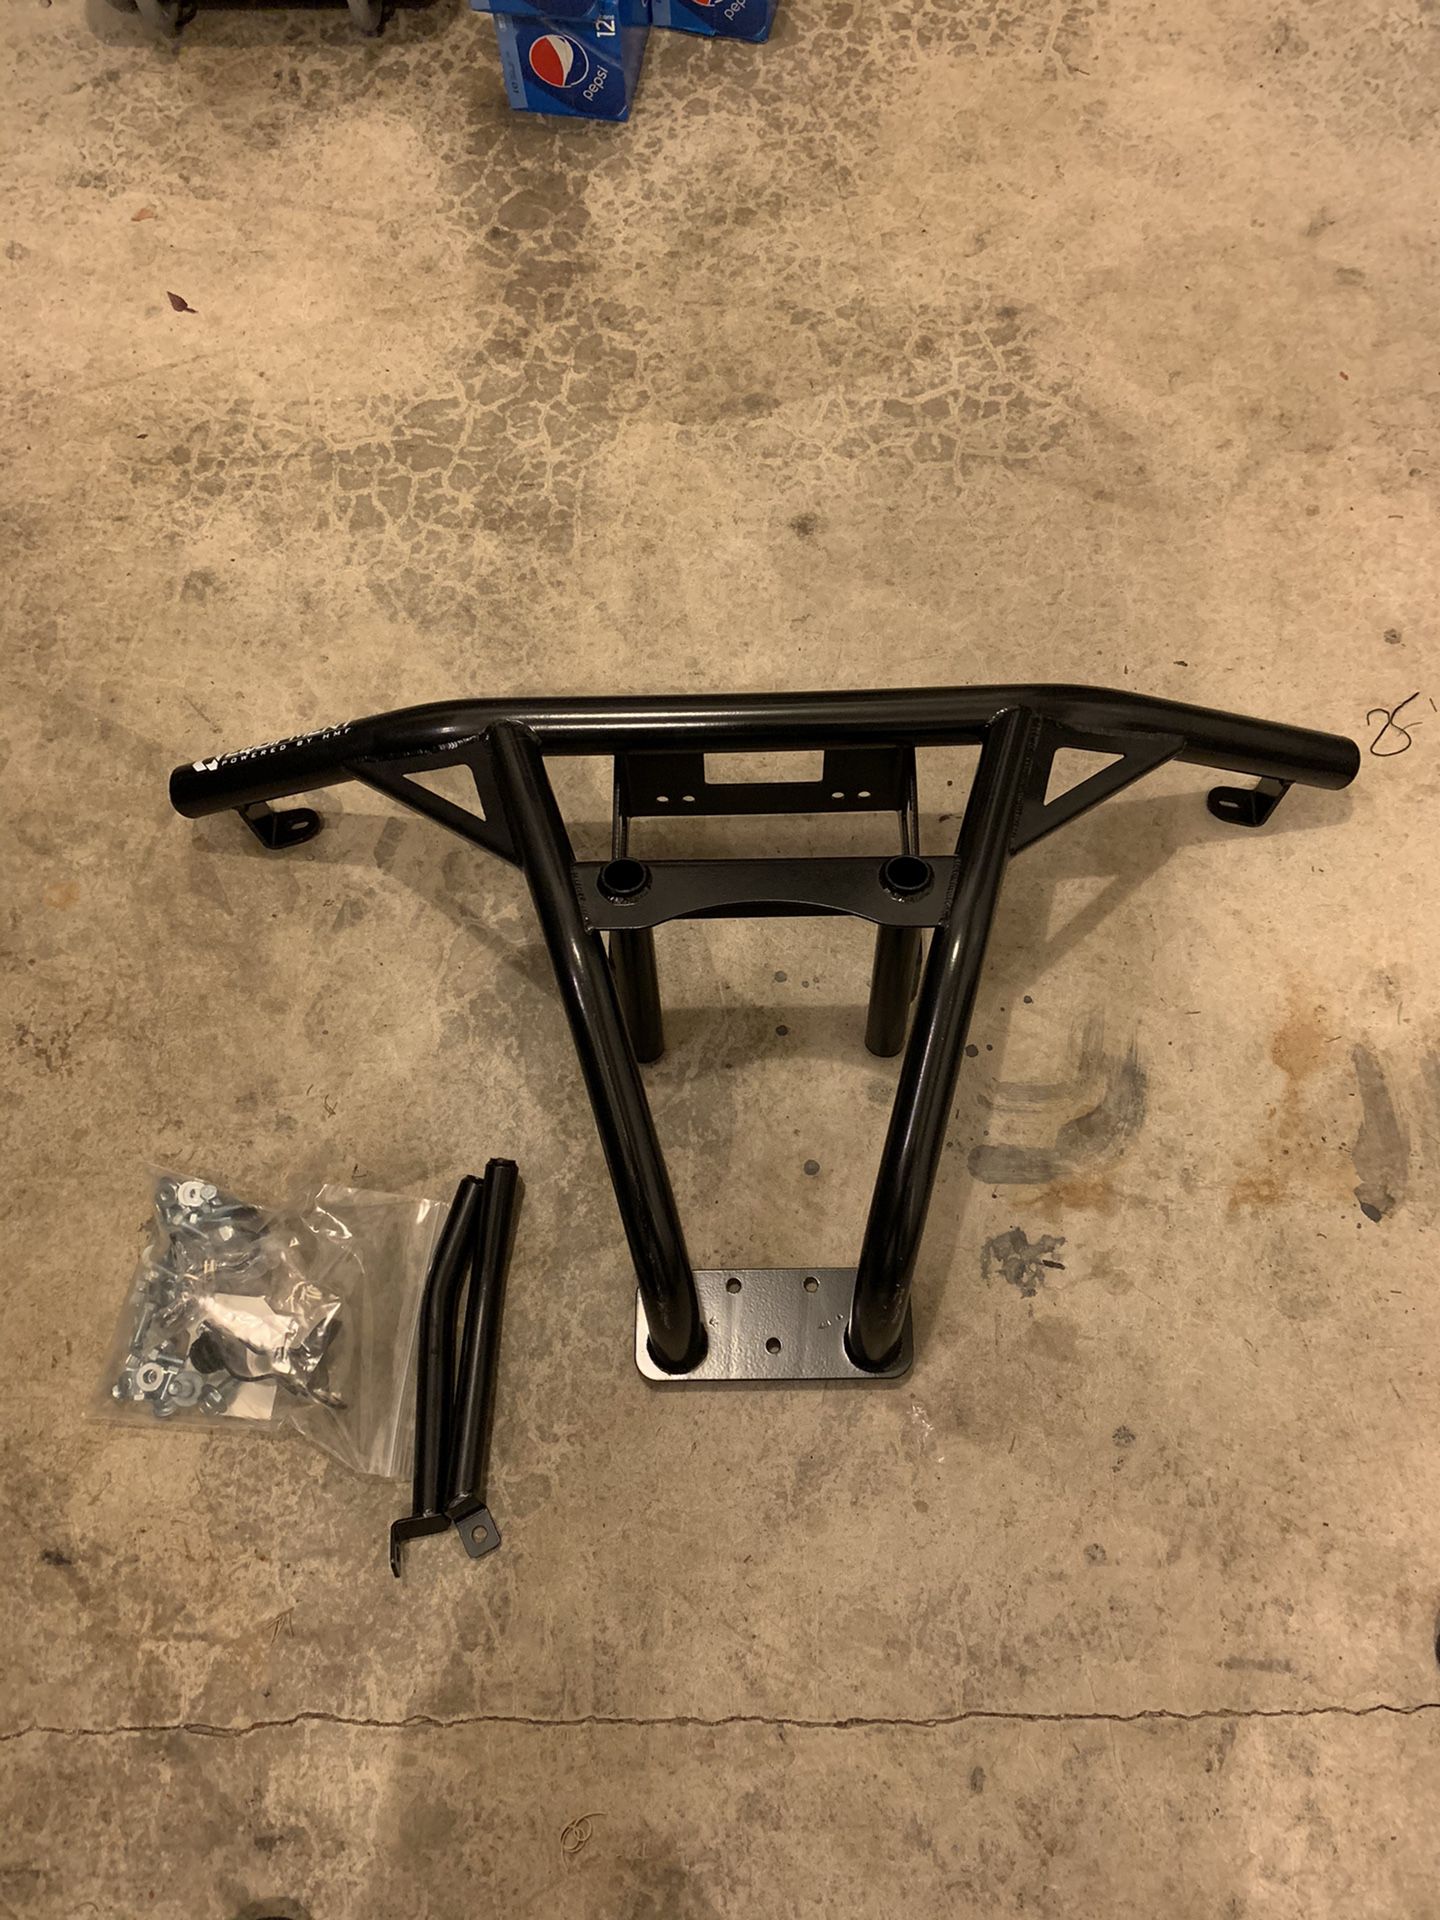 HMF defender front bumper with winch insert.